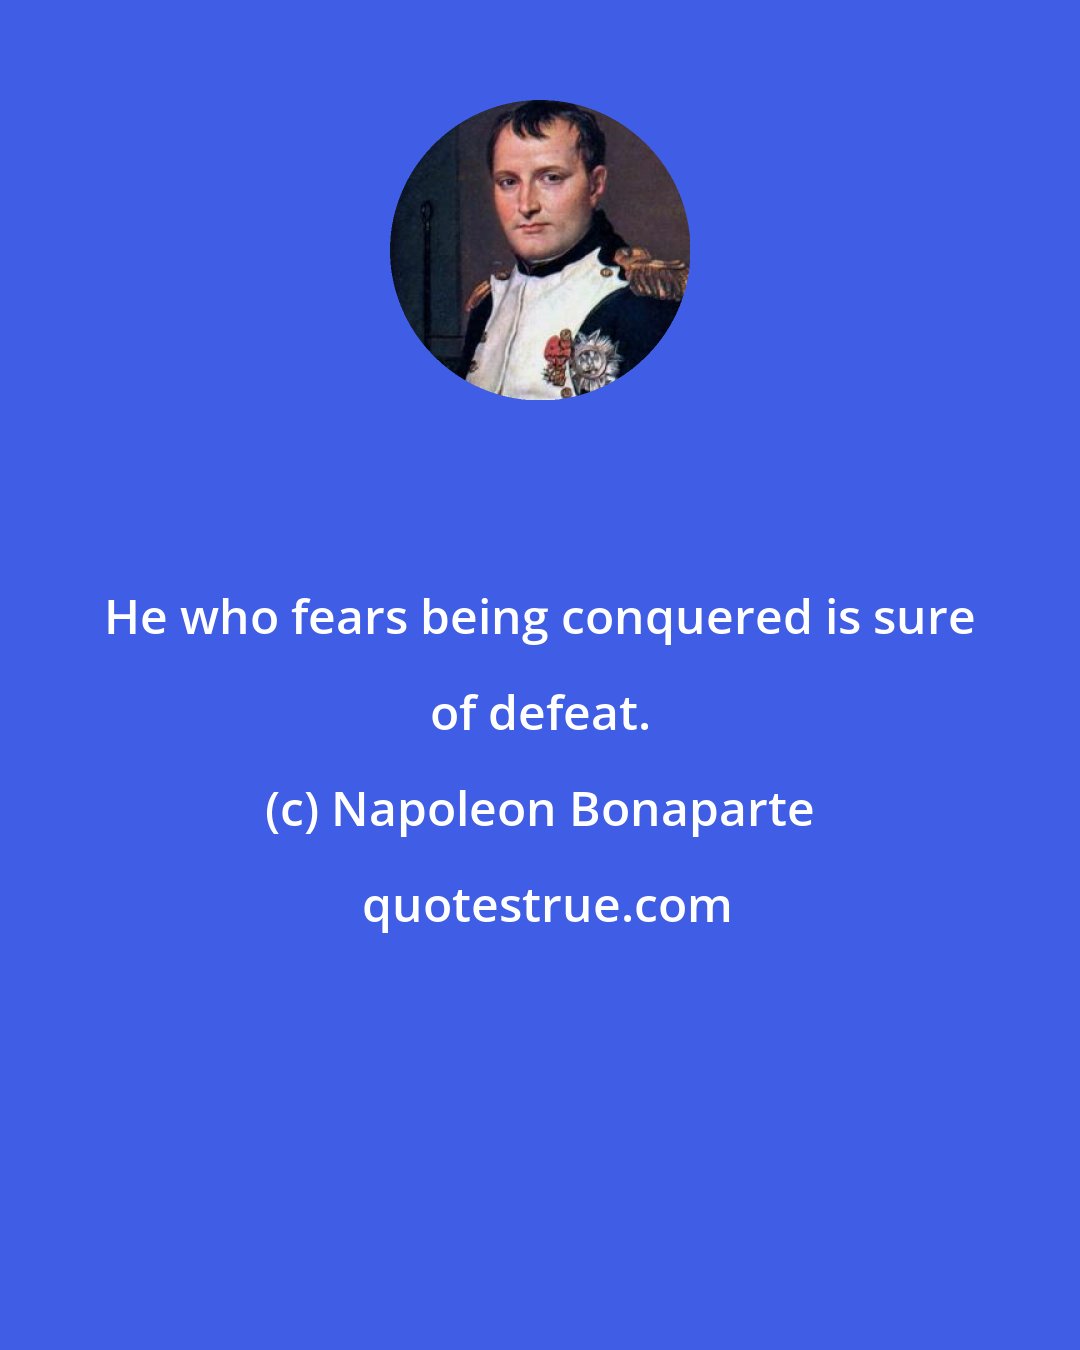 Napoleon Bonaparte: He who fears being conquered is sure of defeat.